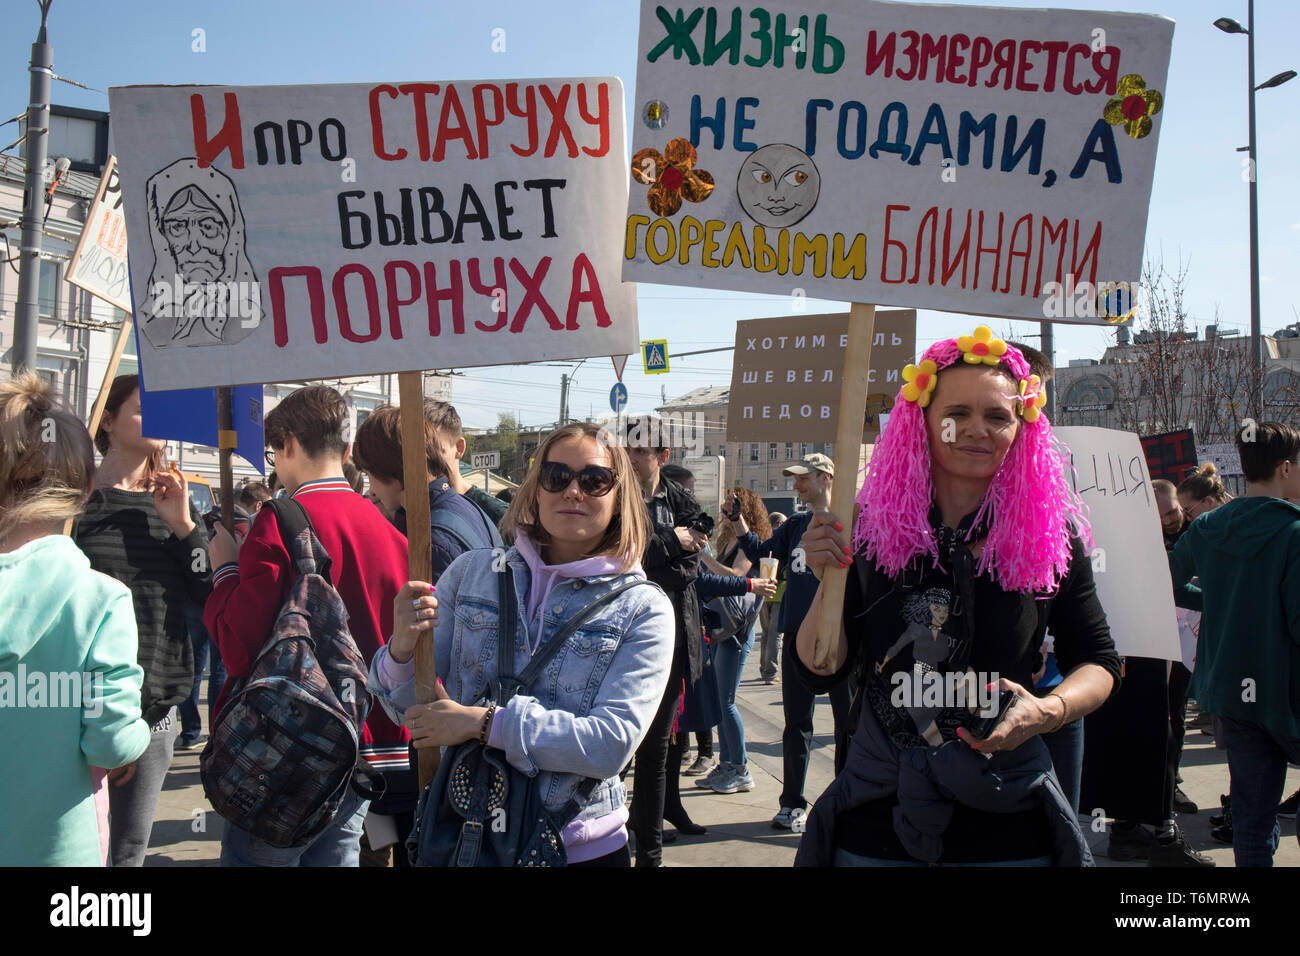 Moscow, RUSSIA - MAY 1, 2019: Russia Celebrates the Absurd and Illogical at Annual Monstration Stock Photo